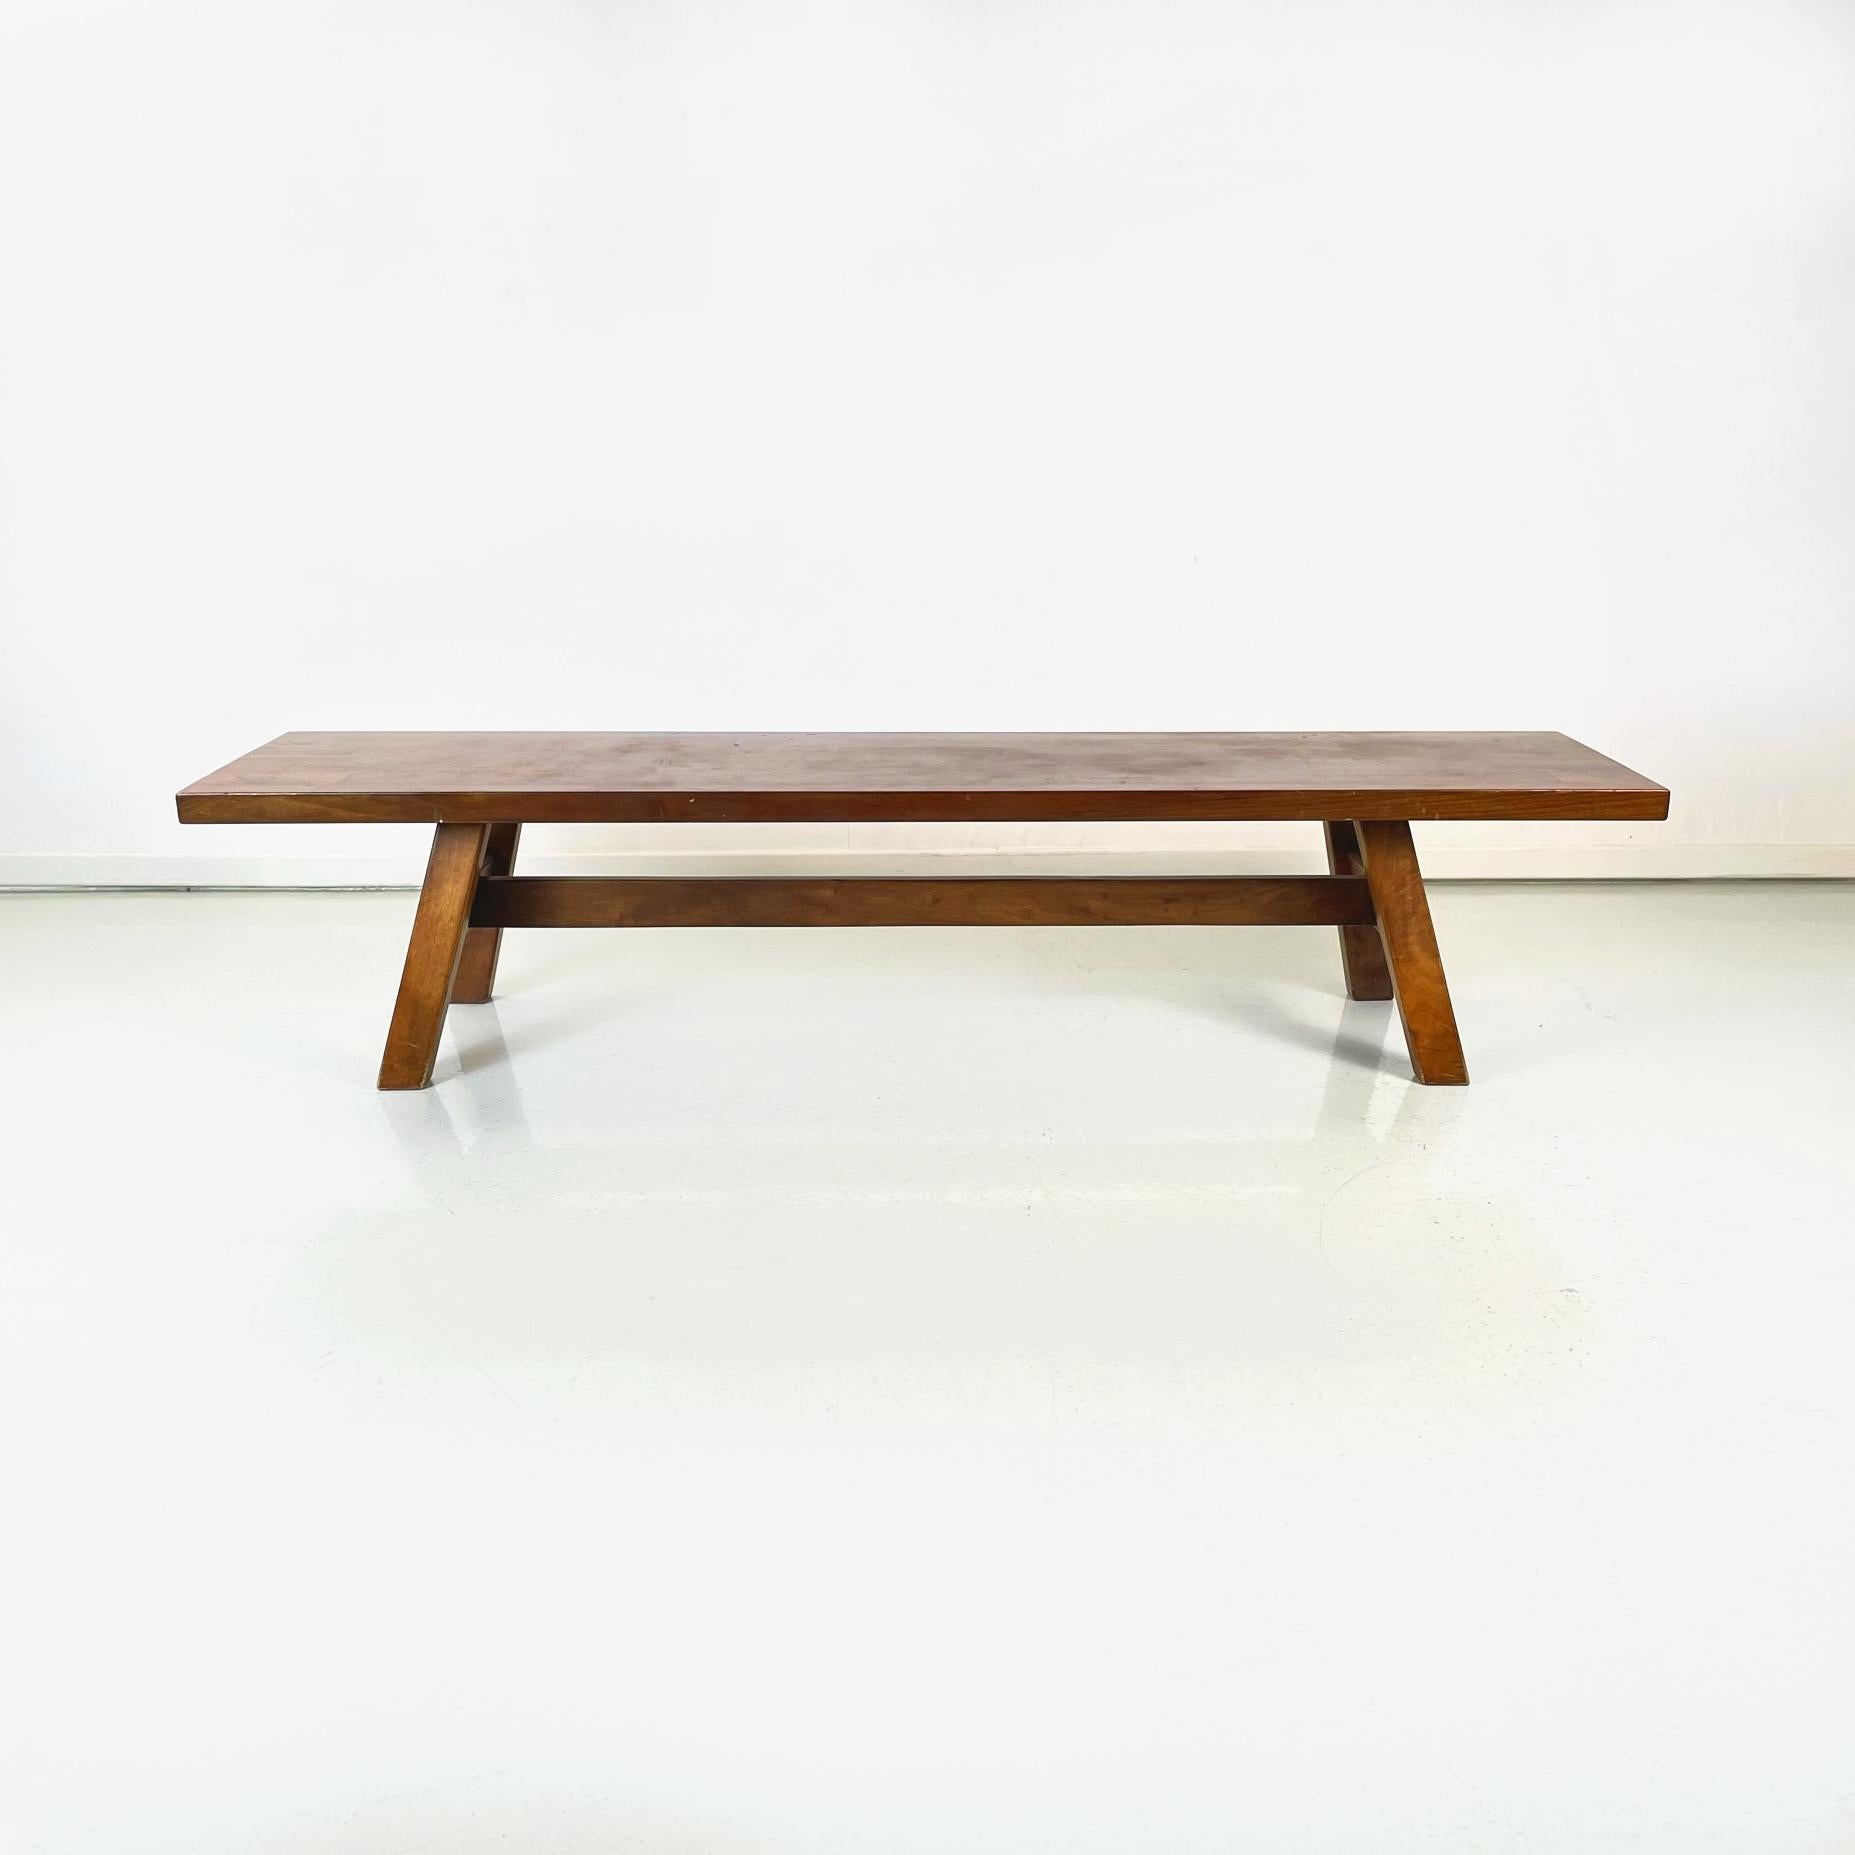 Italian modern wood Bench Torbecchia by Giovanni Michelucci for Poltronova, 1970s
Bench mod. Torbecchia entirely in solid wood. The rectangular seat is supported by the 4 rectangular section legs and by the sleepers.
Produced by Poltronova in